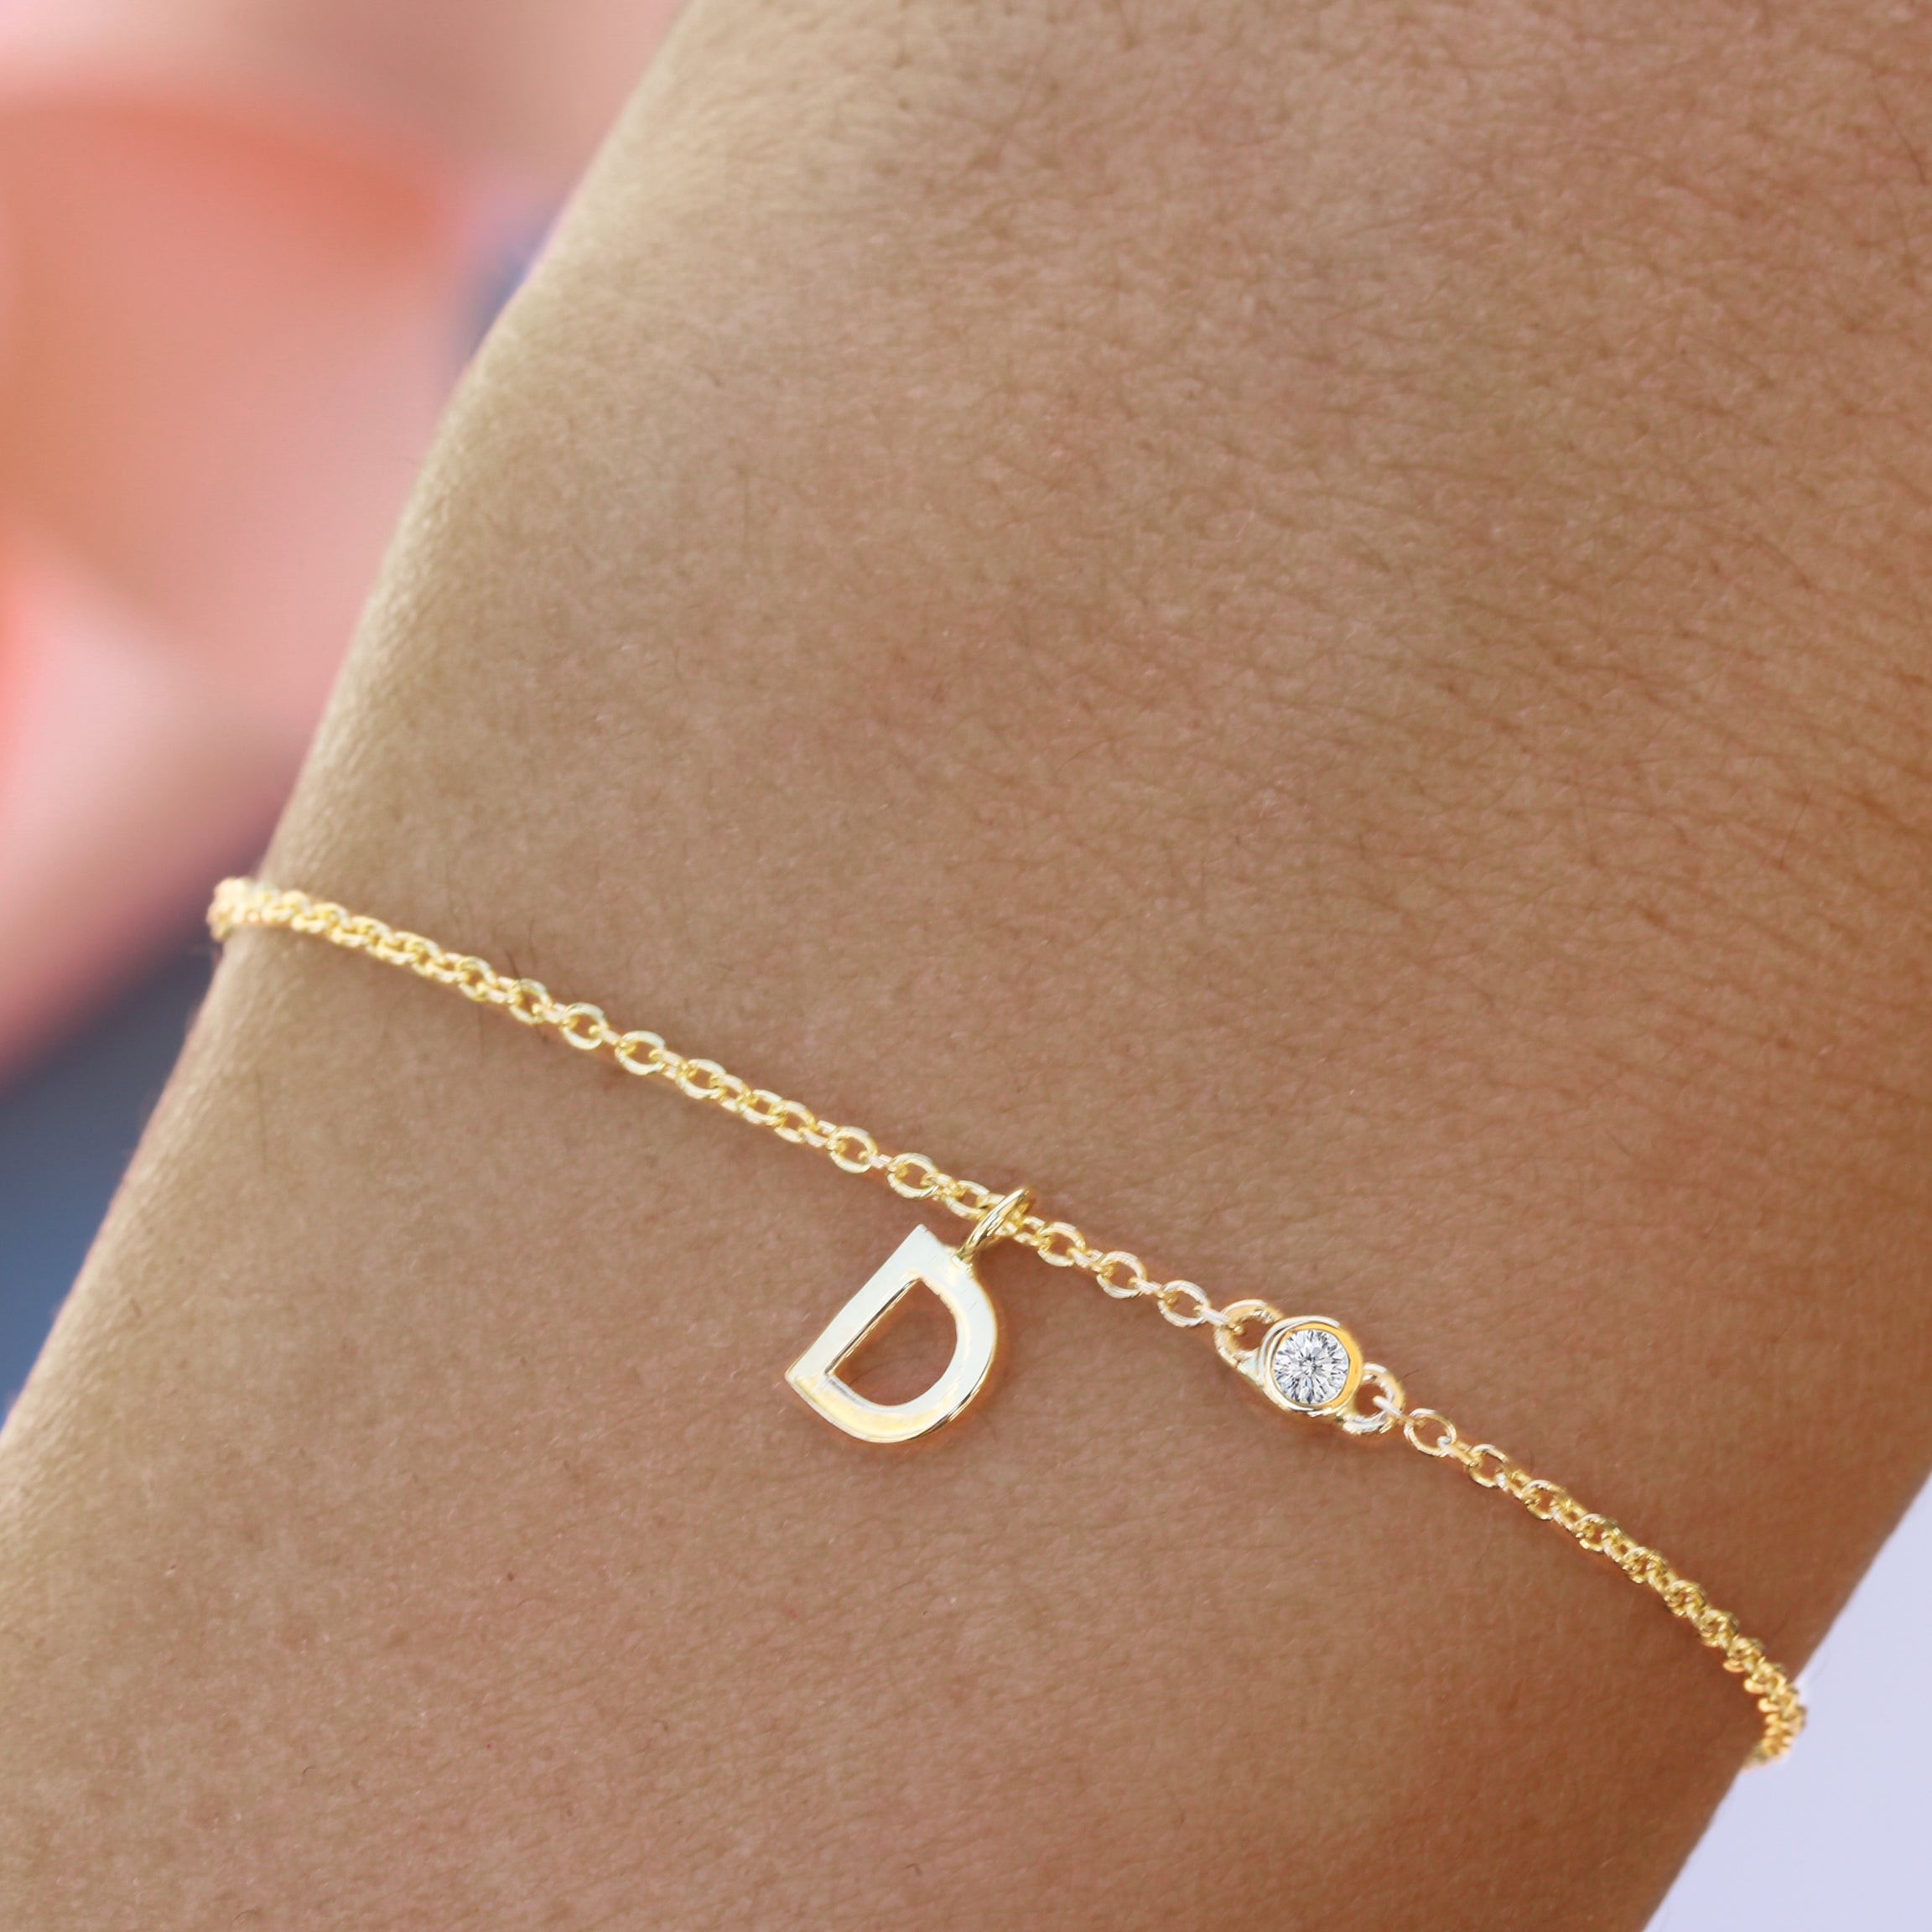 Mini Initial Letter Personalized Bracelet / Necklace 14K Gold with Diamond / Birthstone Necklace 42cm